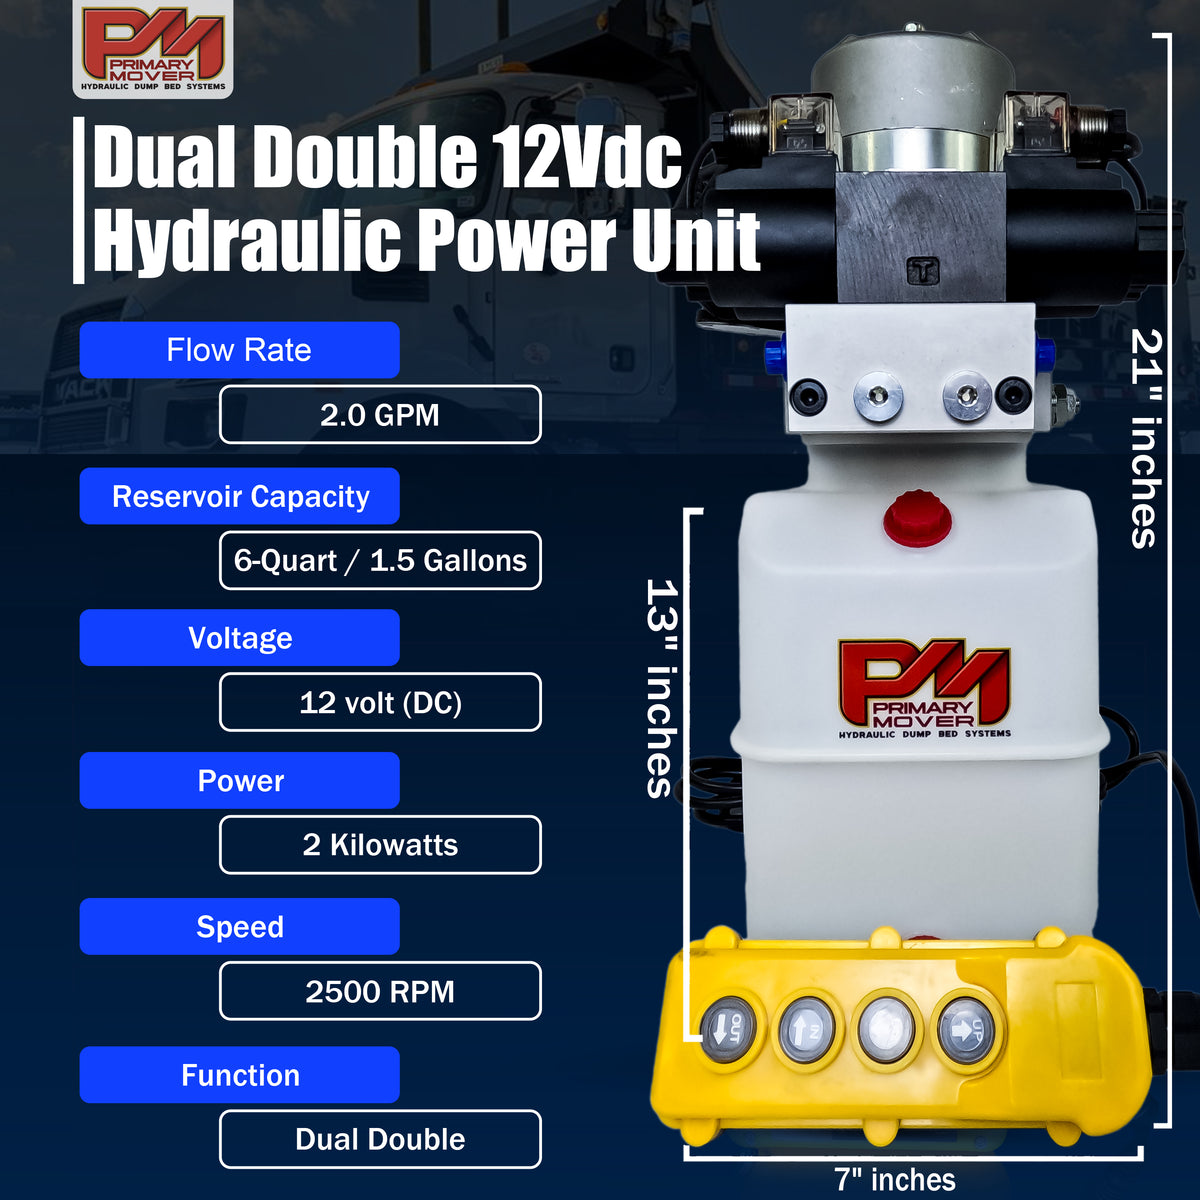 Primary Mover 12V Dual Double-Acting Hydraulic Power Unit: Compact, powerful unit for dump trailers and trucks, enabling four hydraulic actions simultaneously. Built for efficiency and reliability.